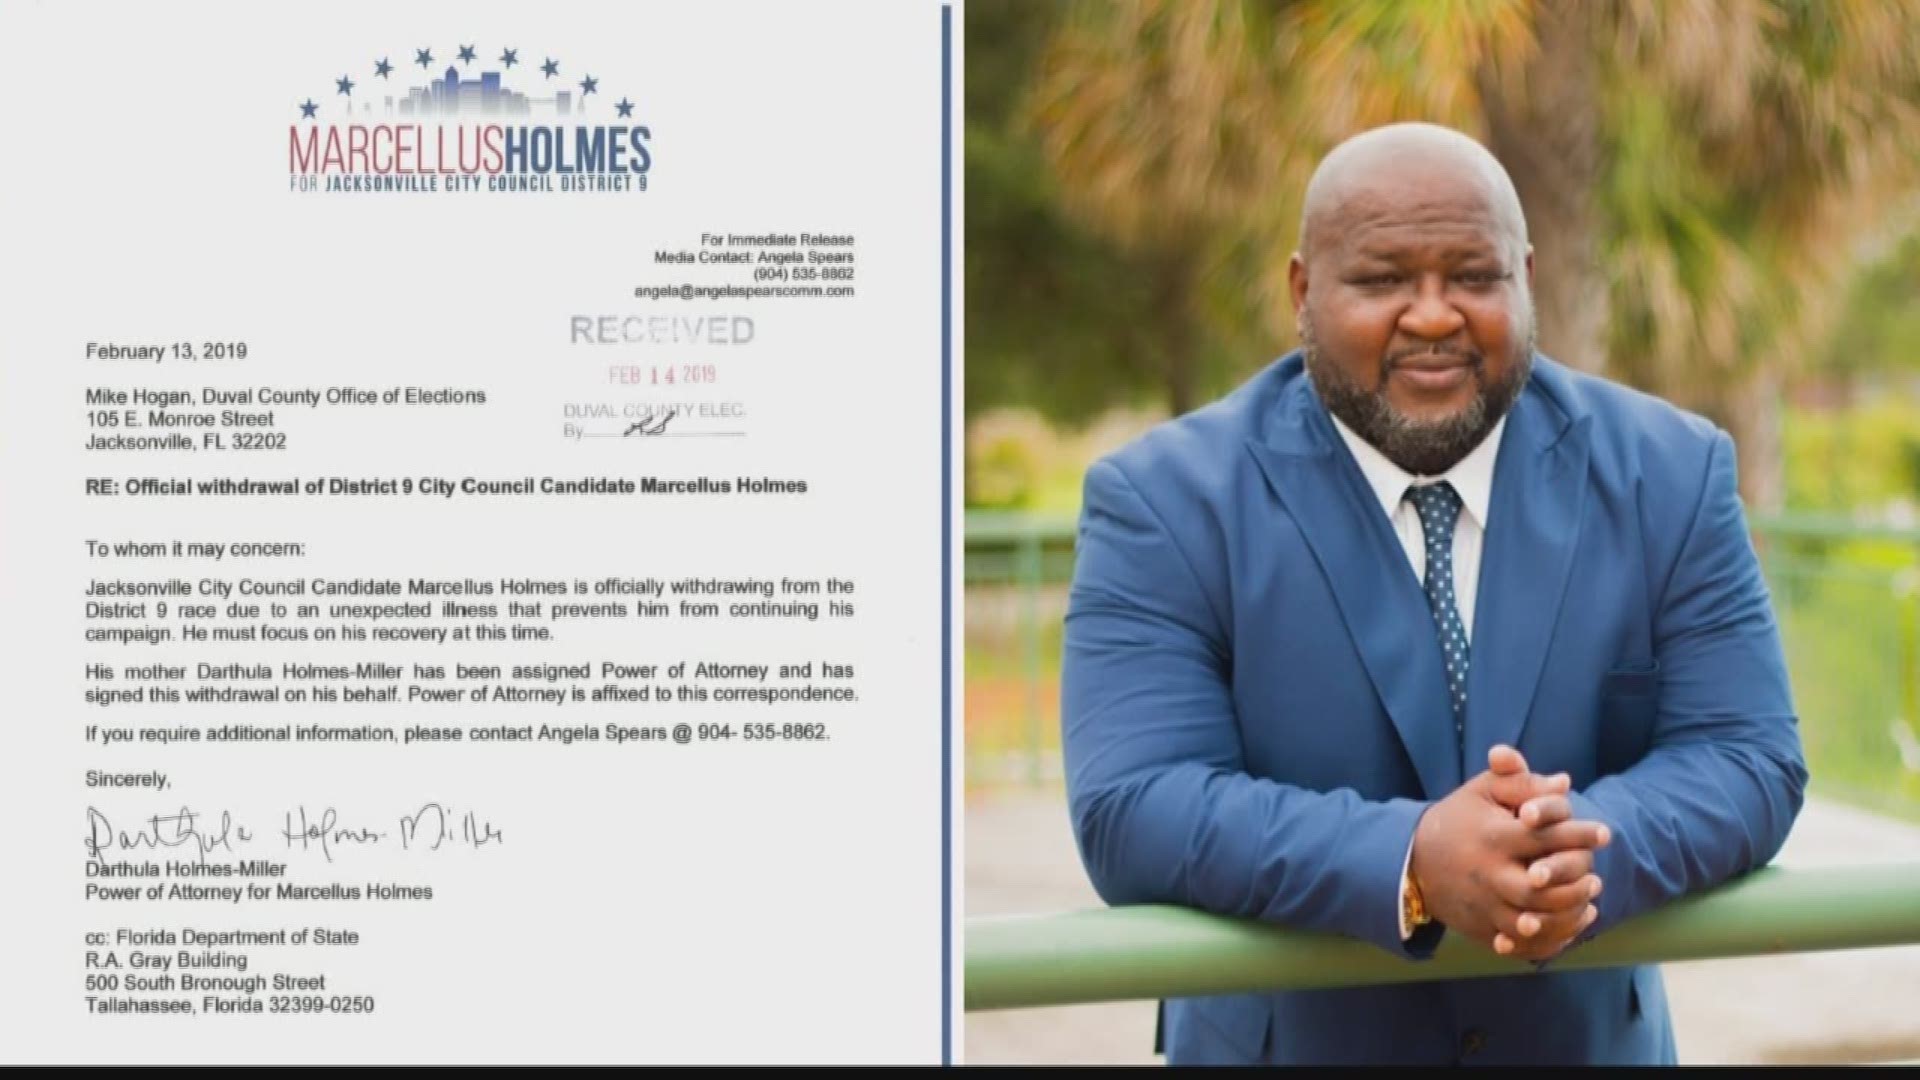 Family of District 9 candidate Marcellus Holmes cites health problems in request to withdraw; campaign officials counter he's still in the running